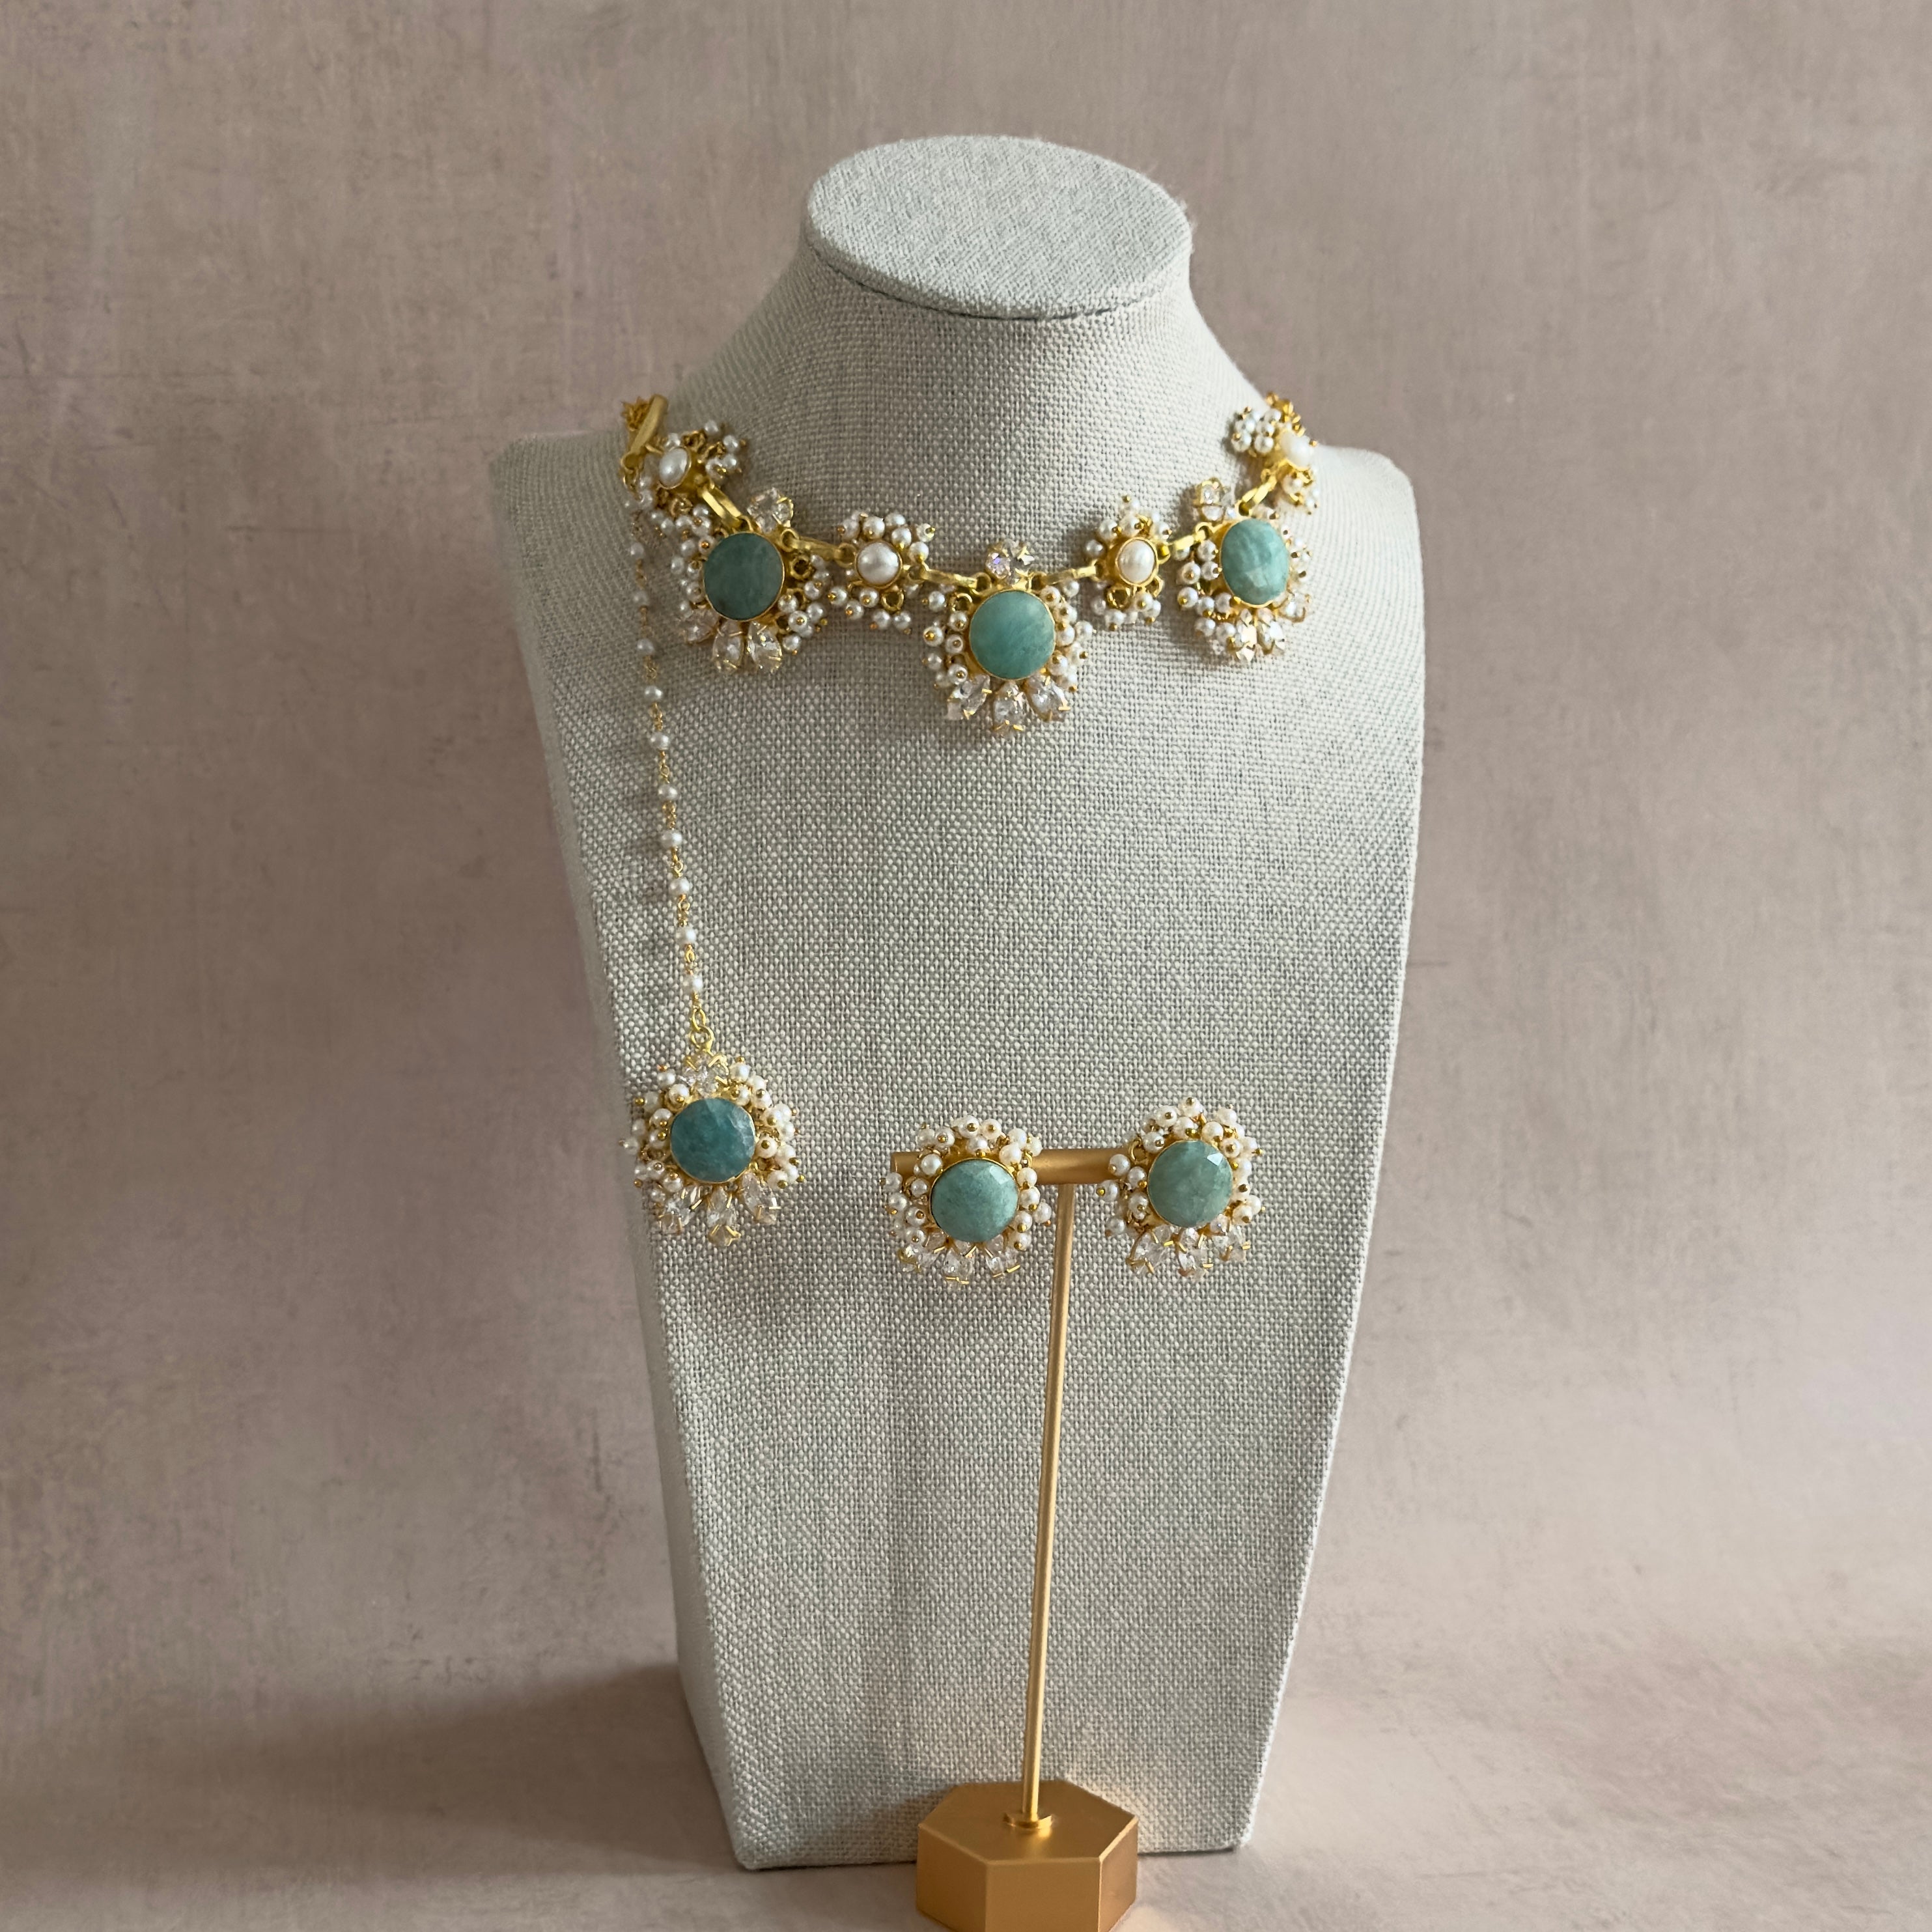 Introducing the Aroz Jade Necklace Set, a stunning accessory that combines the natural beauty of amazonite stones with the rich, luxurious hues of jade. The adjustable chain allows for the perfect fit, while the complementary earrings and tikka complete the look. Elevate your style with this exclusive and sophisticated necklace set.